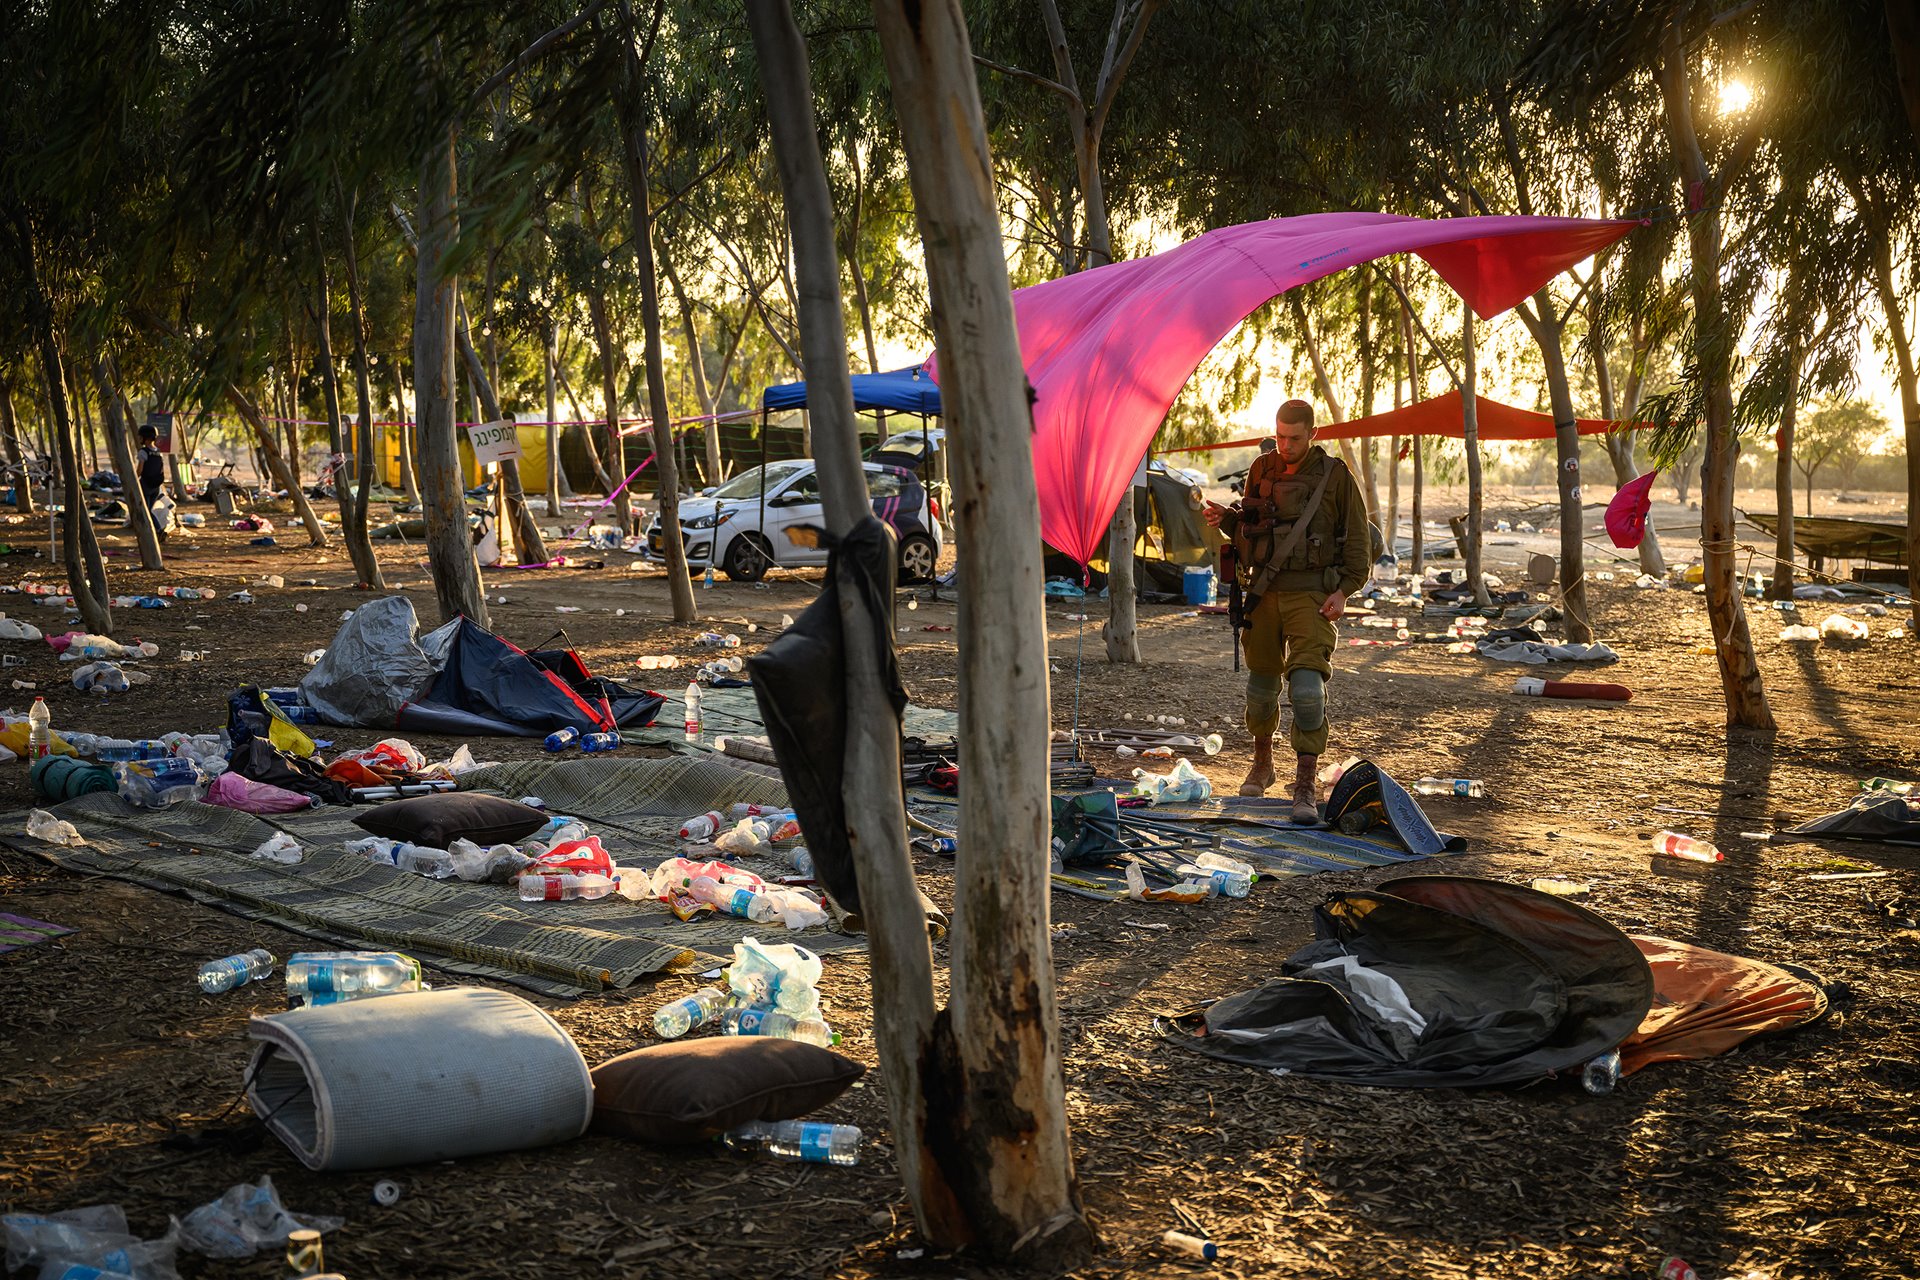 An Israeli security forces officer searches the site of the Supernova music festival for personal effects of victims of the 7 October Hamas attack, which resulted in around 1,200 deaths, more than 2,500 reported injuries, and some 250 people held hostage from the festival and communities near the Gaza border. Re&rsquo;im, Israel.